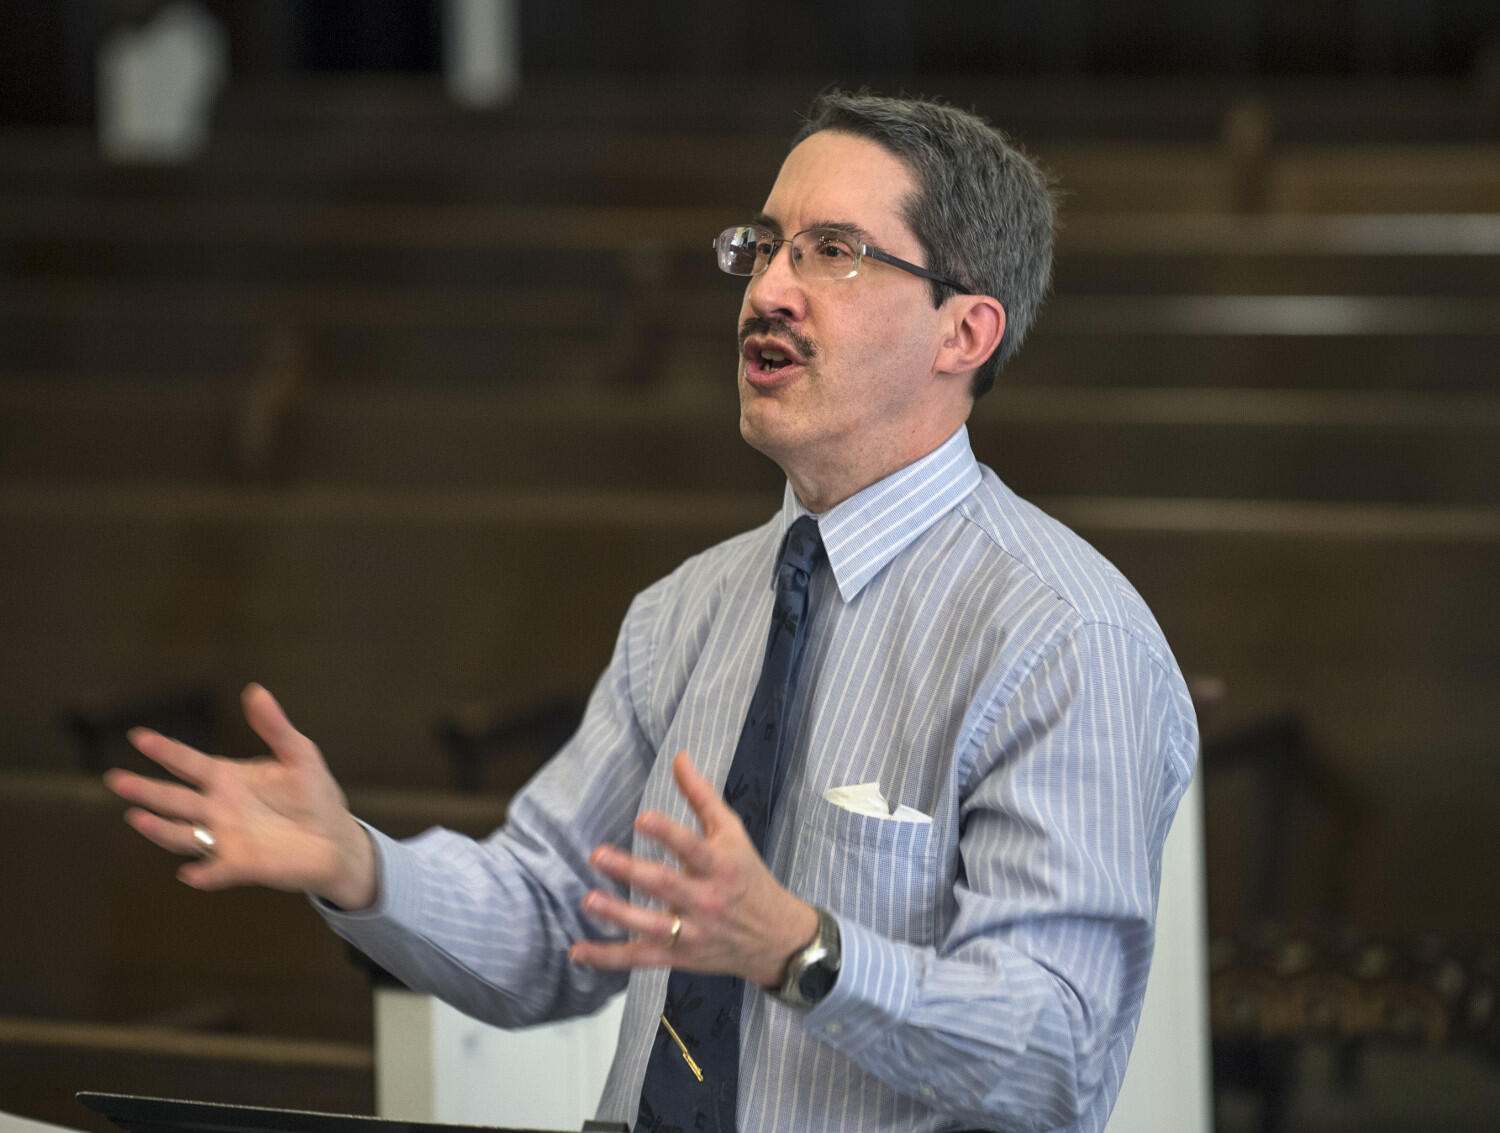 Antonio García, professor of music and director of jazz studies in the Department of Music in the VCU School of the Arts, wrote the music and adapted the text of "Writing Our Way Out." During a rehearsal of "Open Minds, Closer Thoughts," García offered notes and feedback.